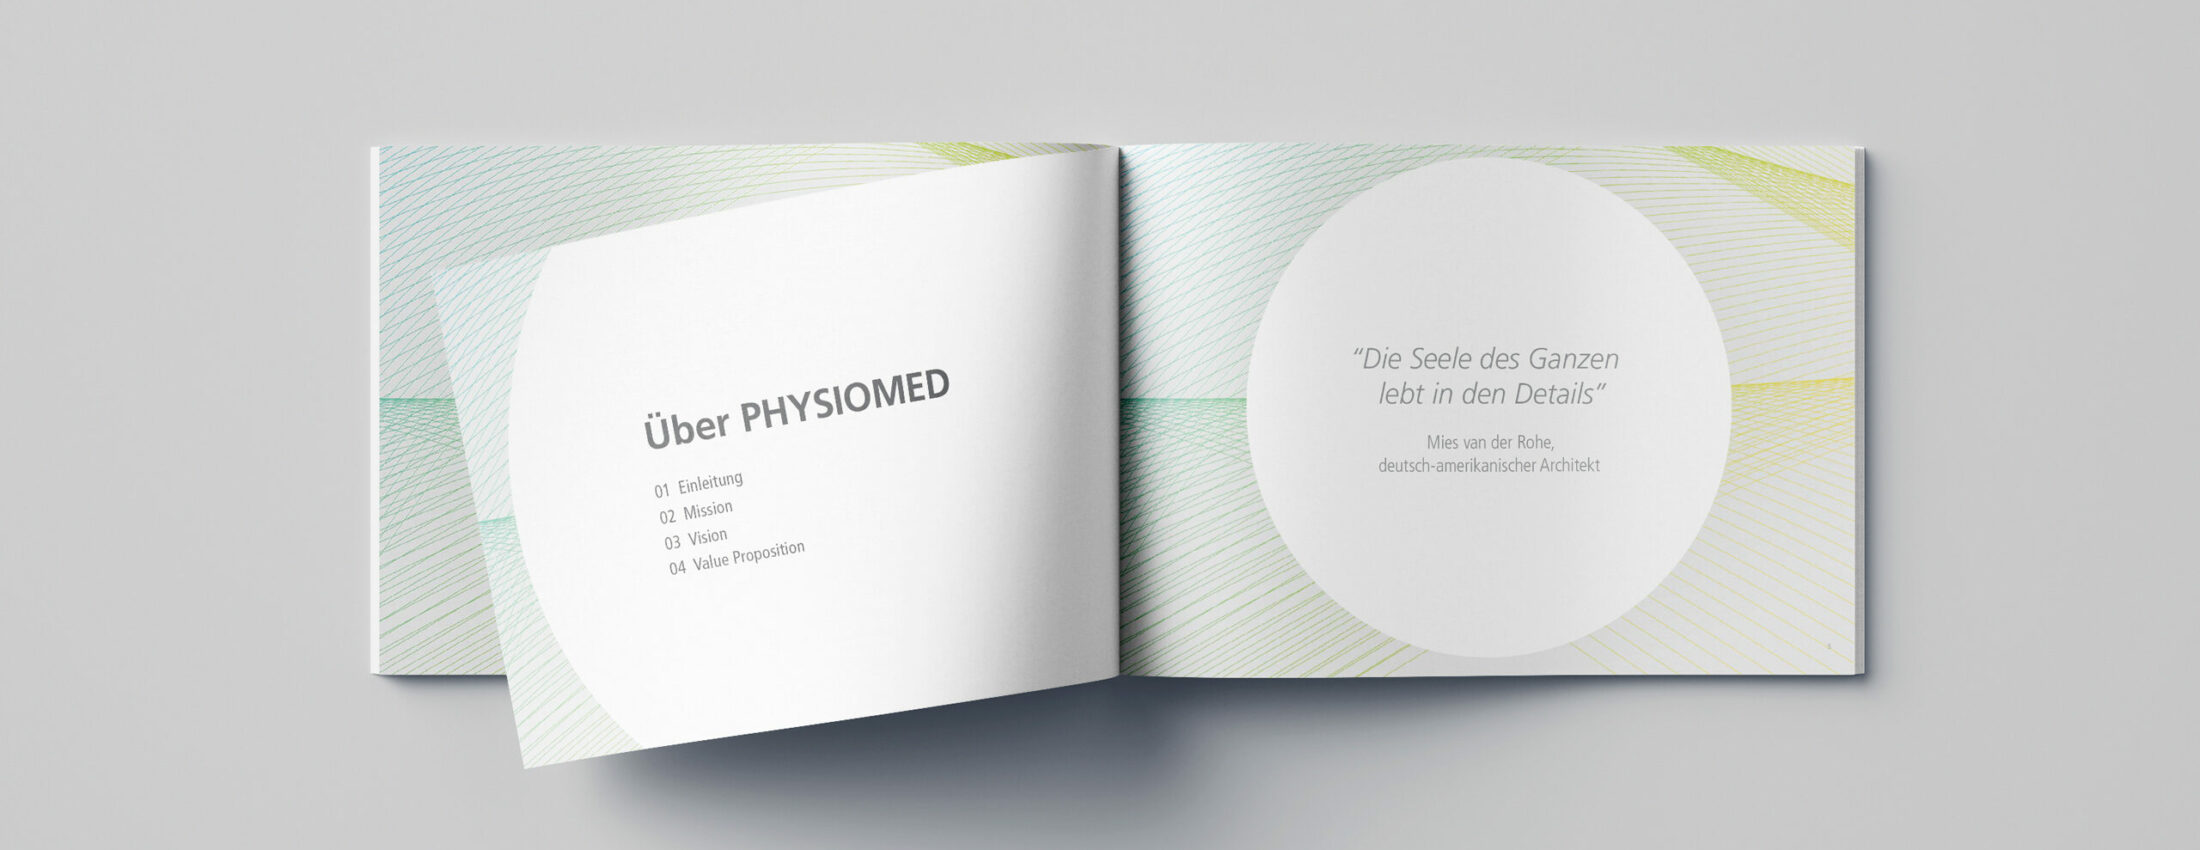 PHYSIOMED_Styleguide_Mockup_1